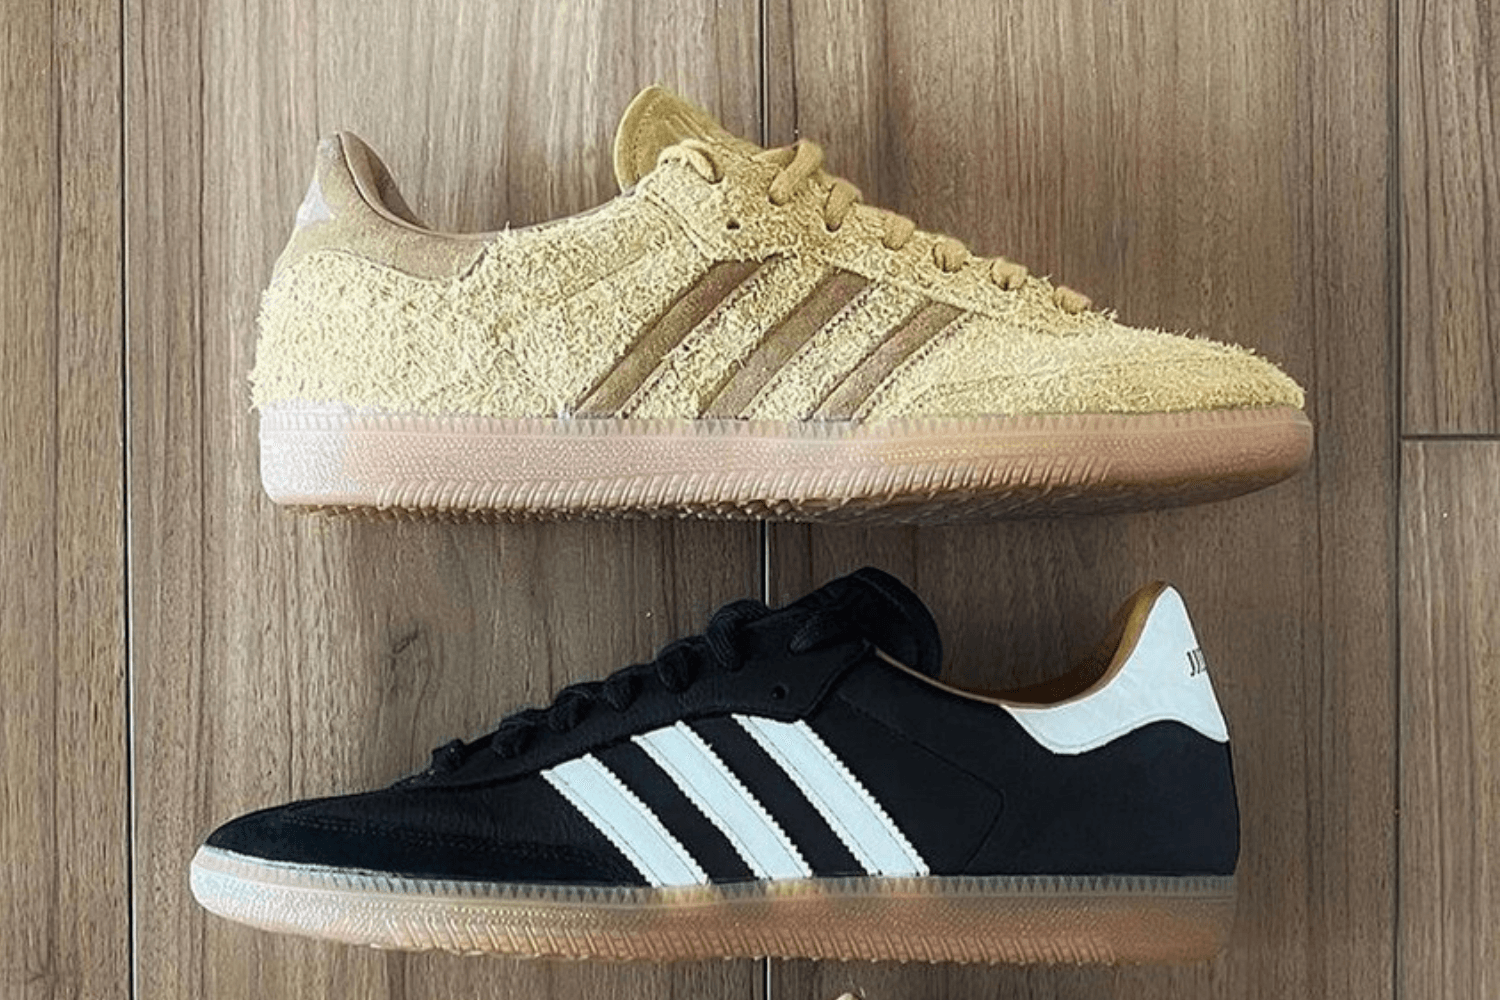 JJJound comes out with two adidas Samba colorways